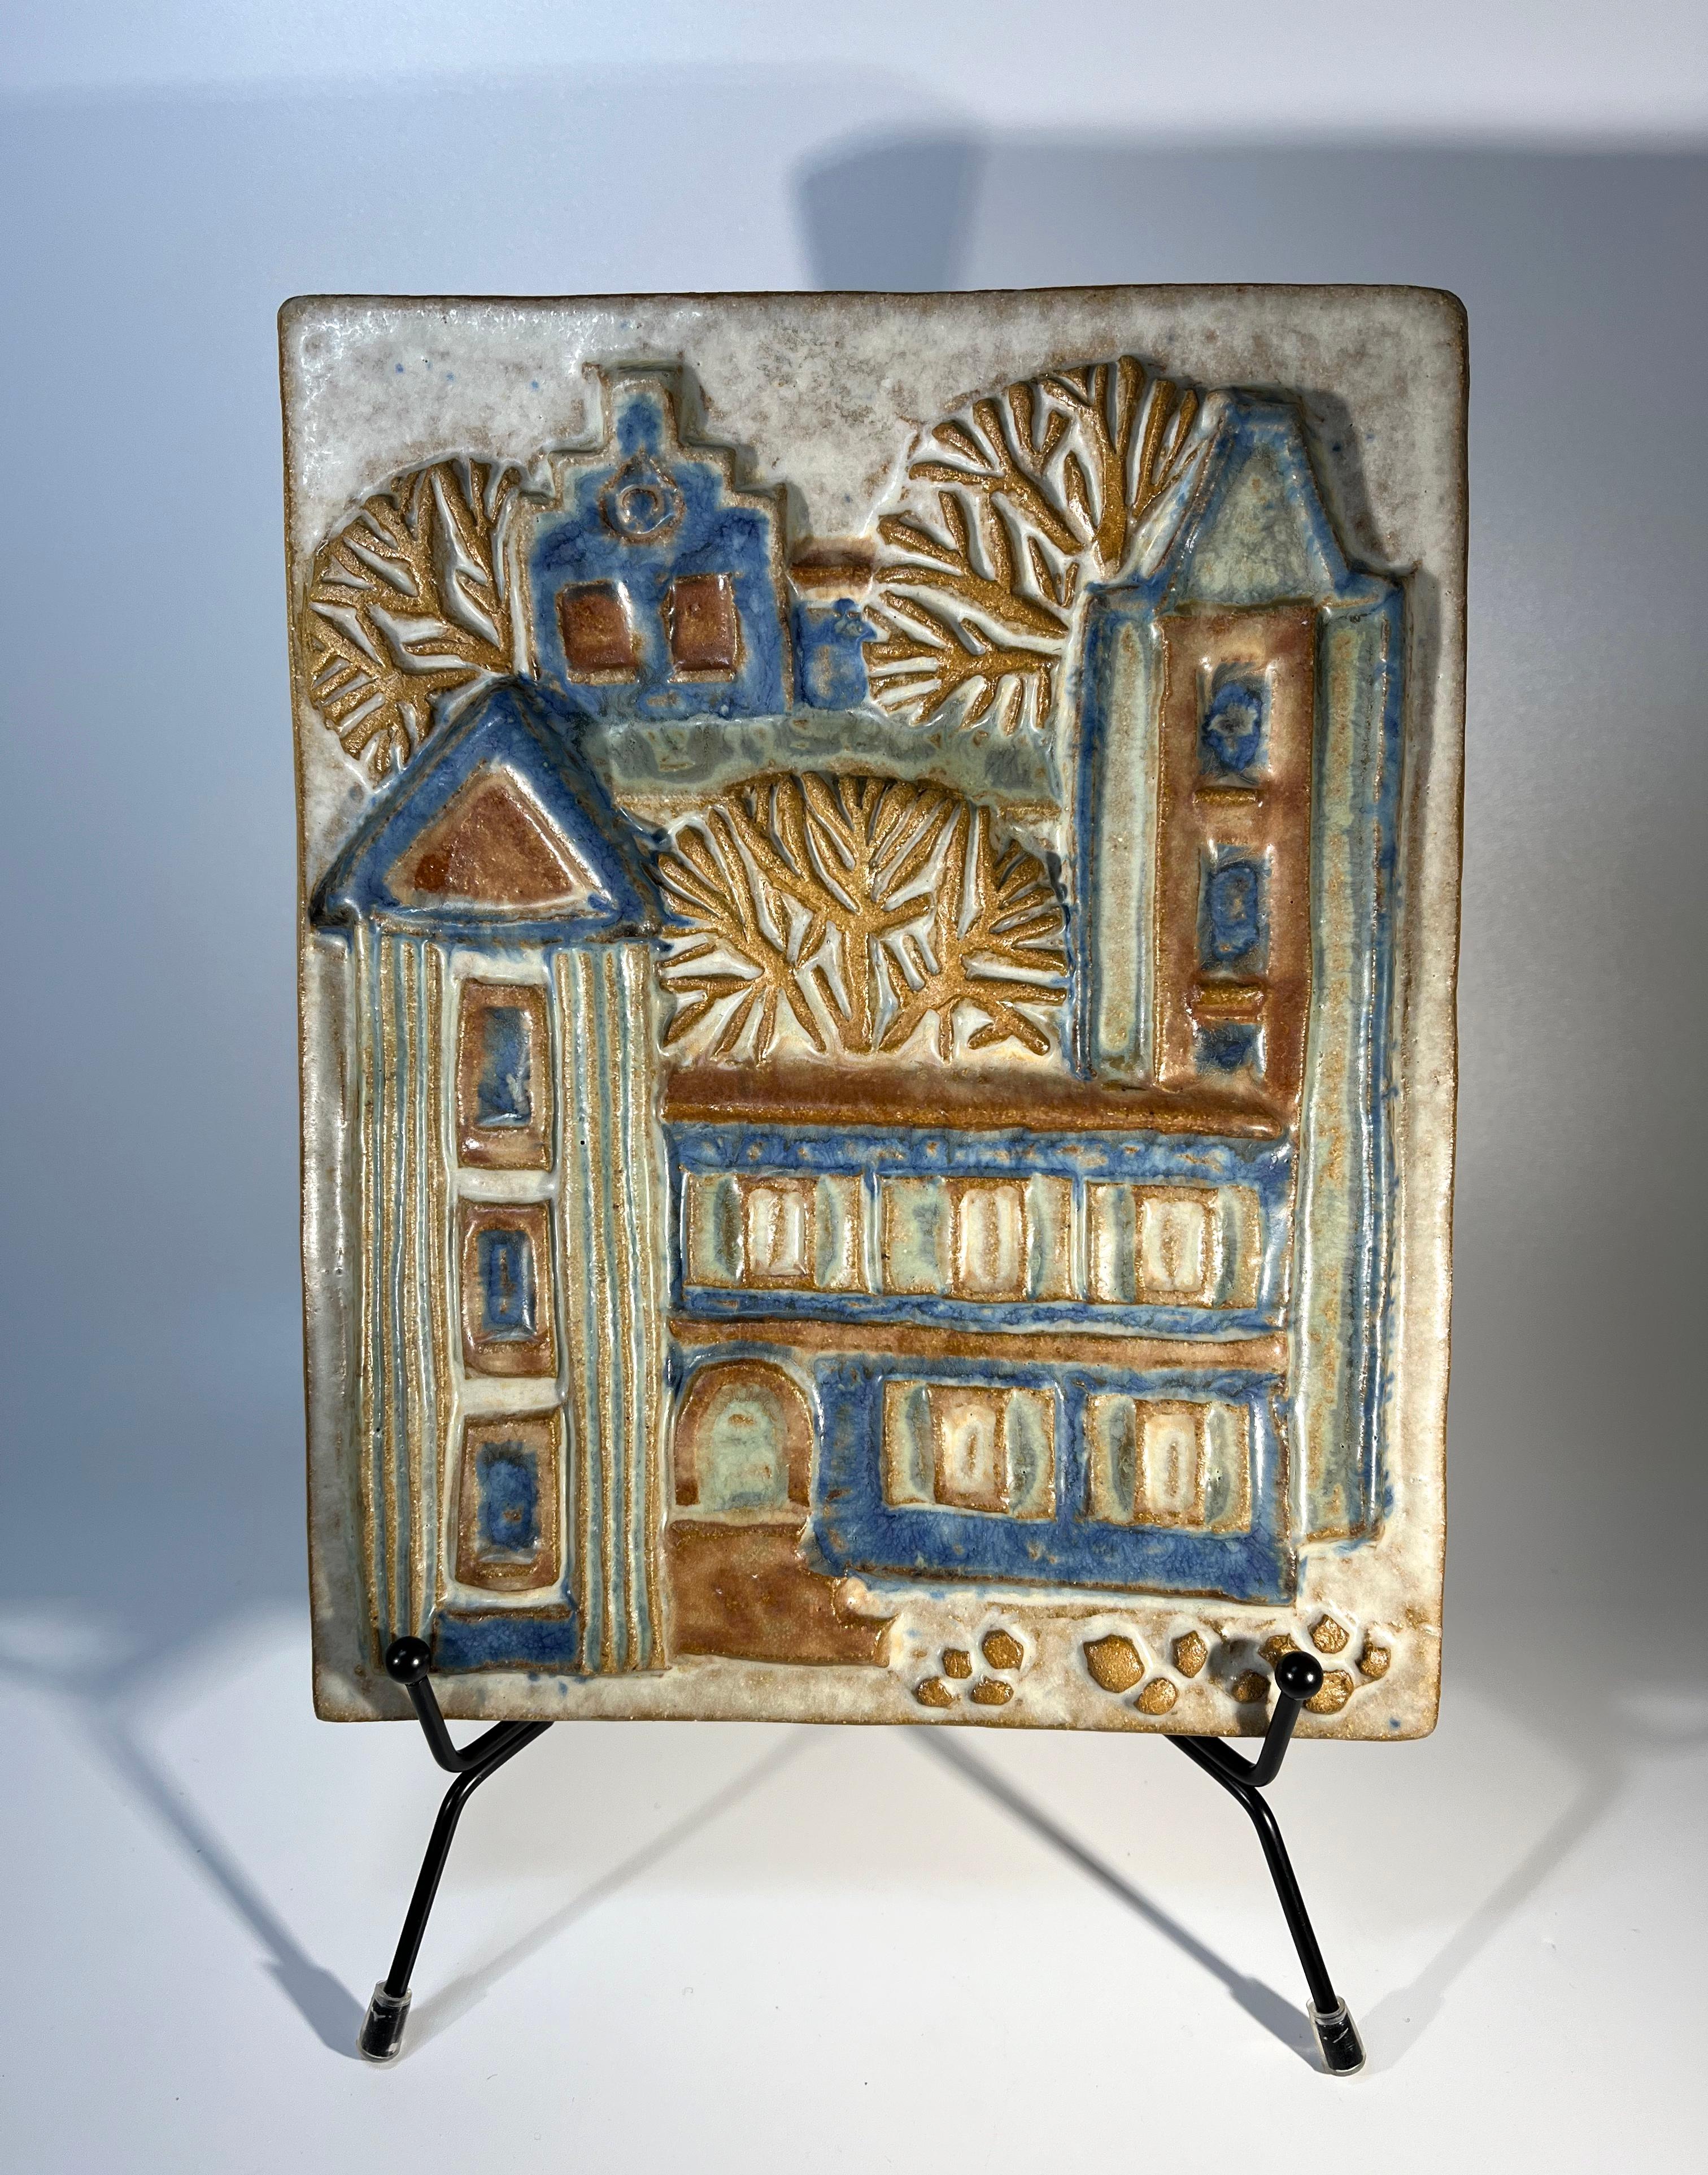 Delightful Bornholm wall plaque by Marianne Starck for Michael Andersen, Denmark 
Soft tones of blues and browns on hand crafted stoneware
Stamped MS, Three Herrings mark, Bornholm and #6169 on reverse
Width 7 inch, Height 8.5 inch, Depth 1